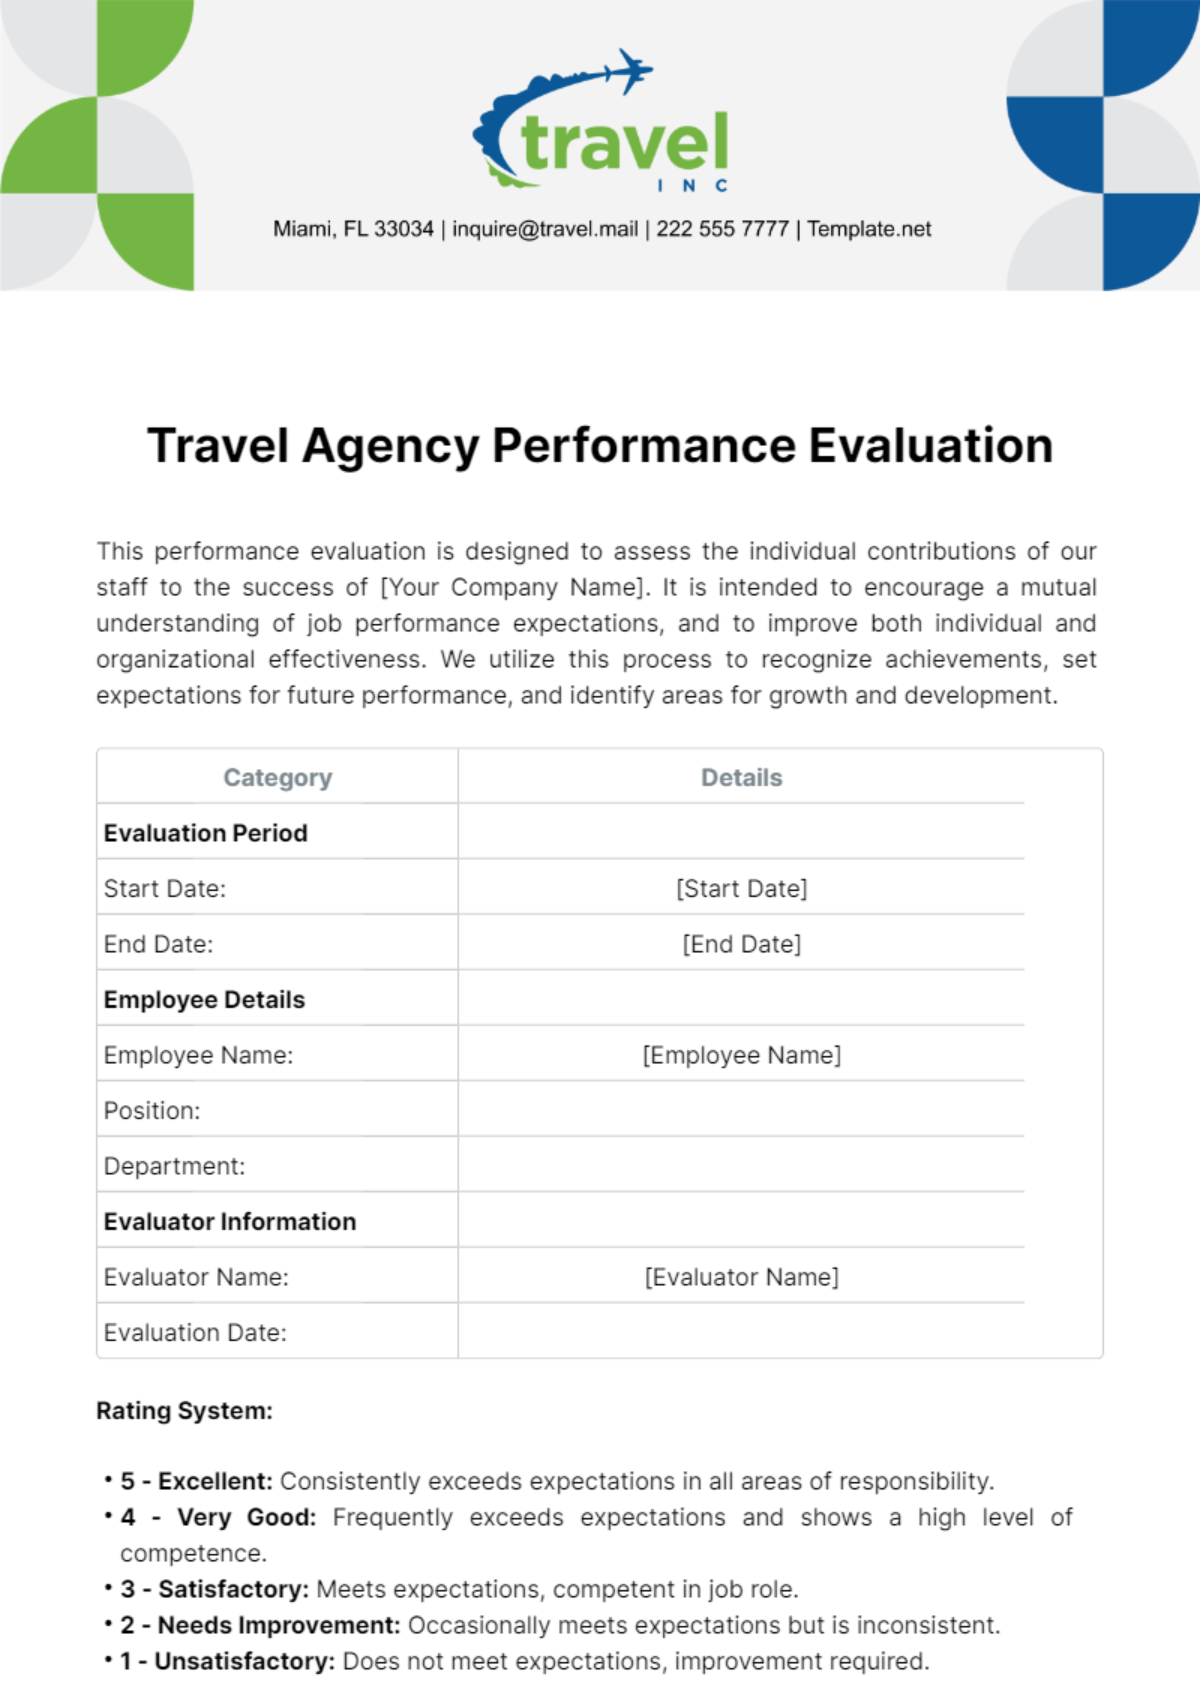 Free Travel Agency Performance Evaluation Template